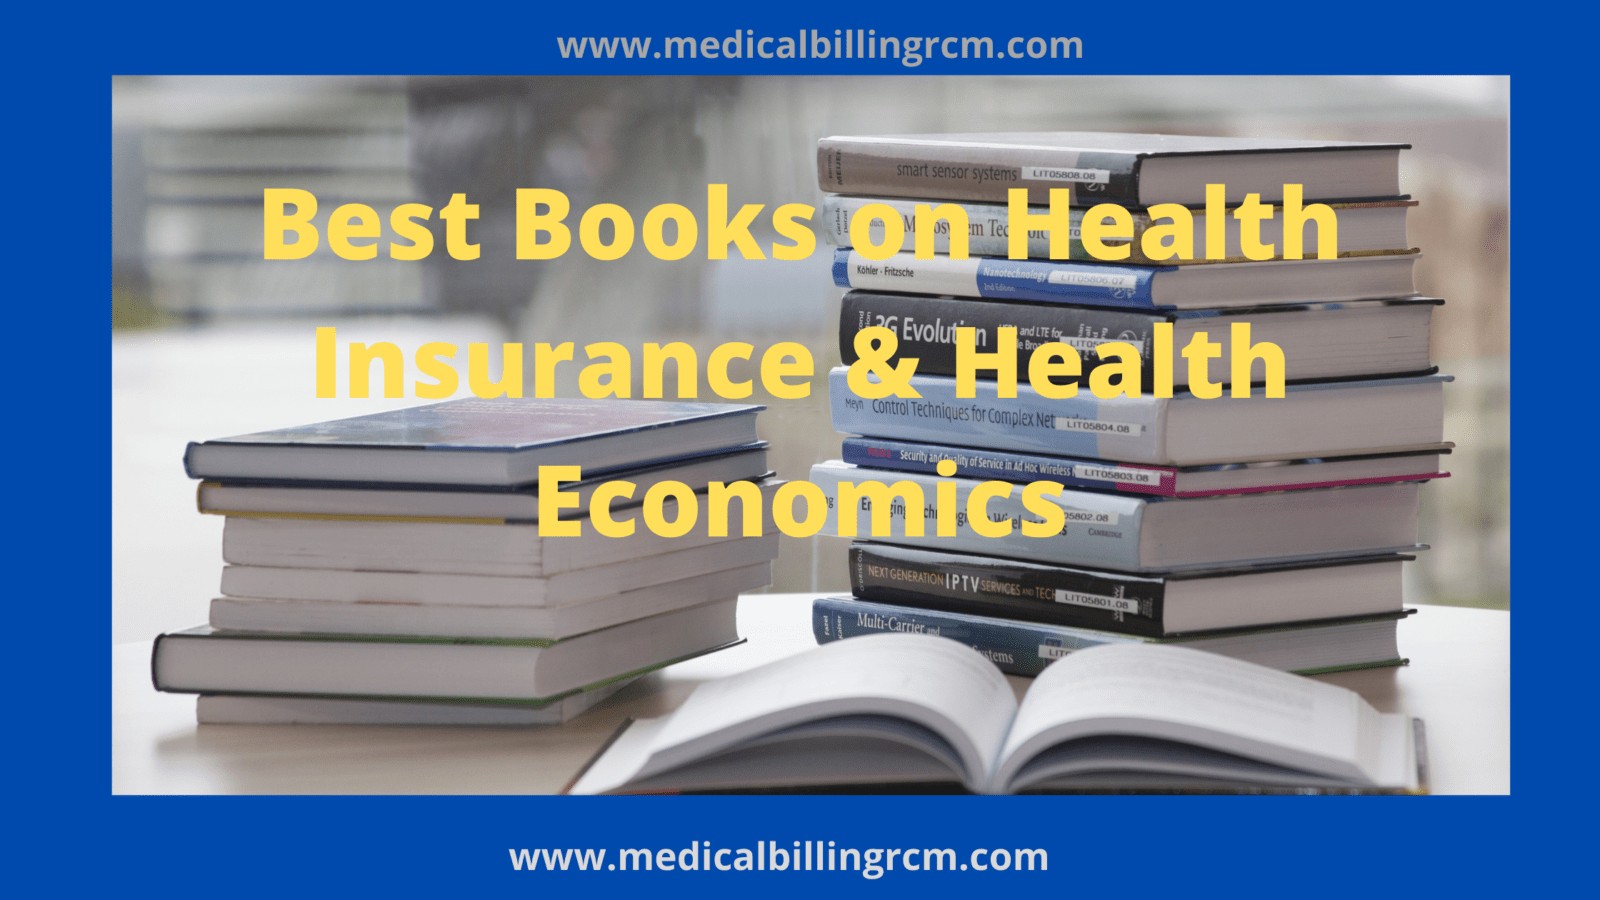 best books on healthcare and insurance